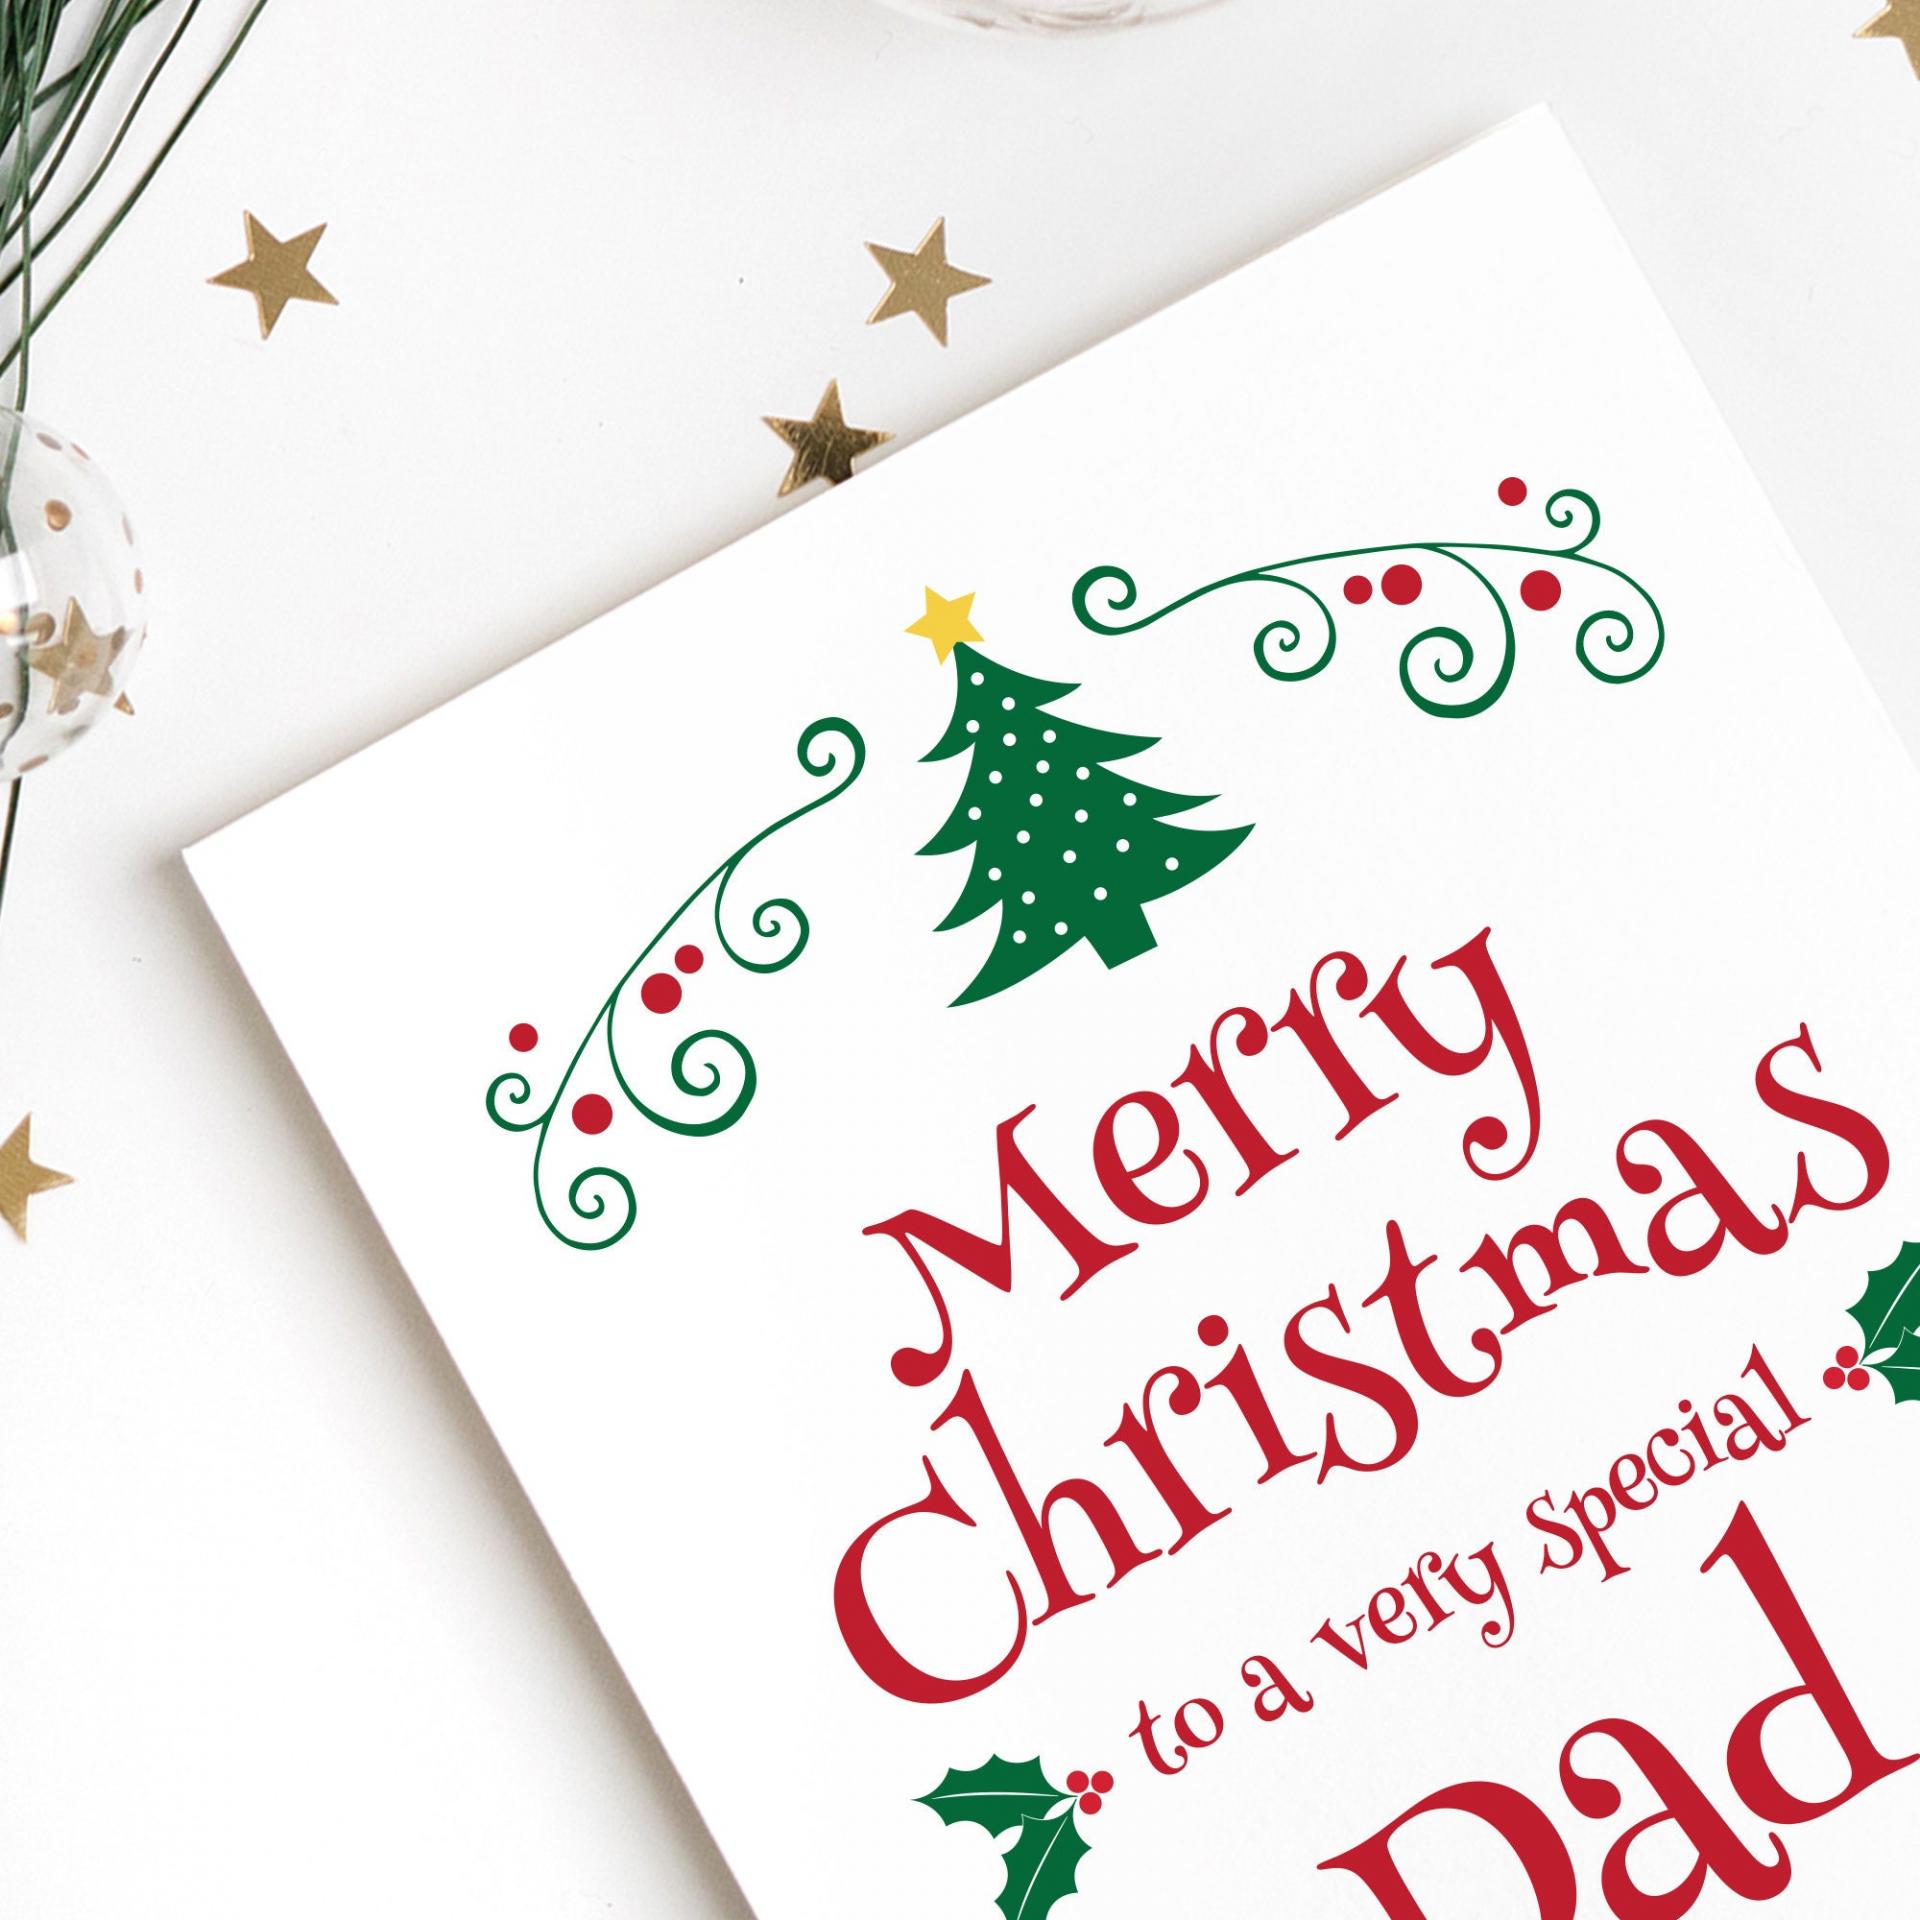 Dad Christmas Card, Dad Christmas Gift For Father, Dad Card, Father in Law Gift, Christmas Dad Card, Dad Present, Daddy Card